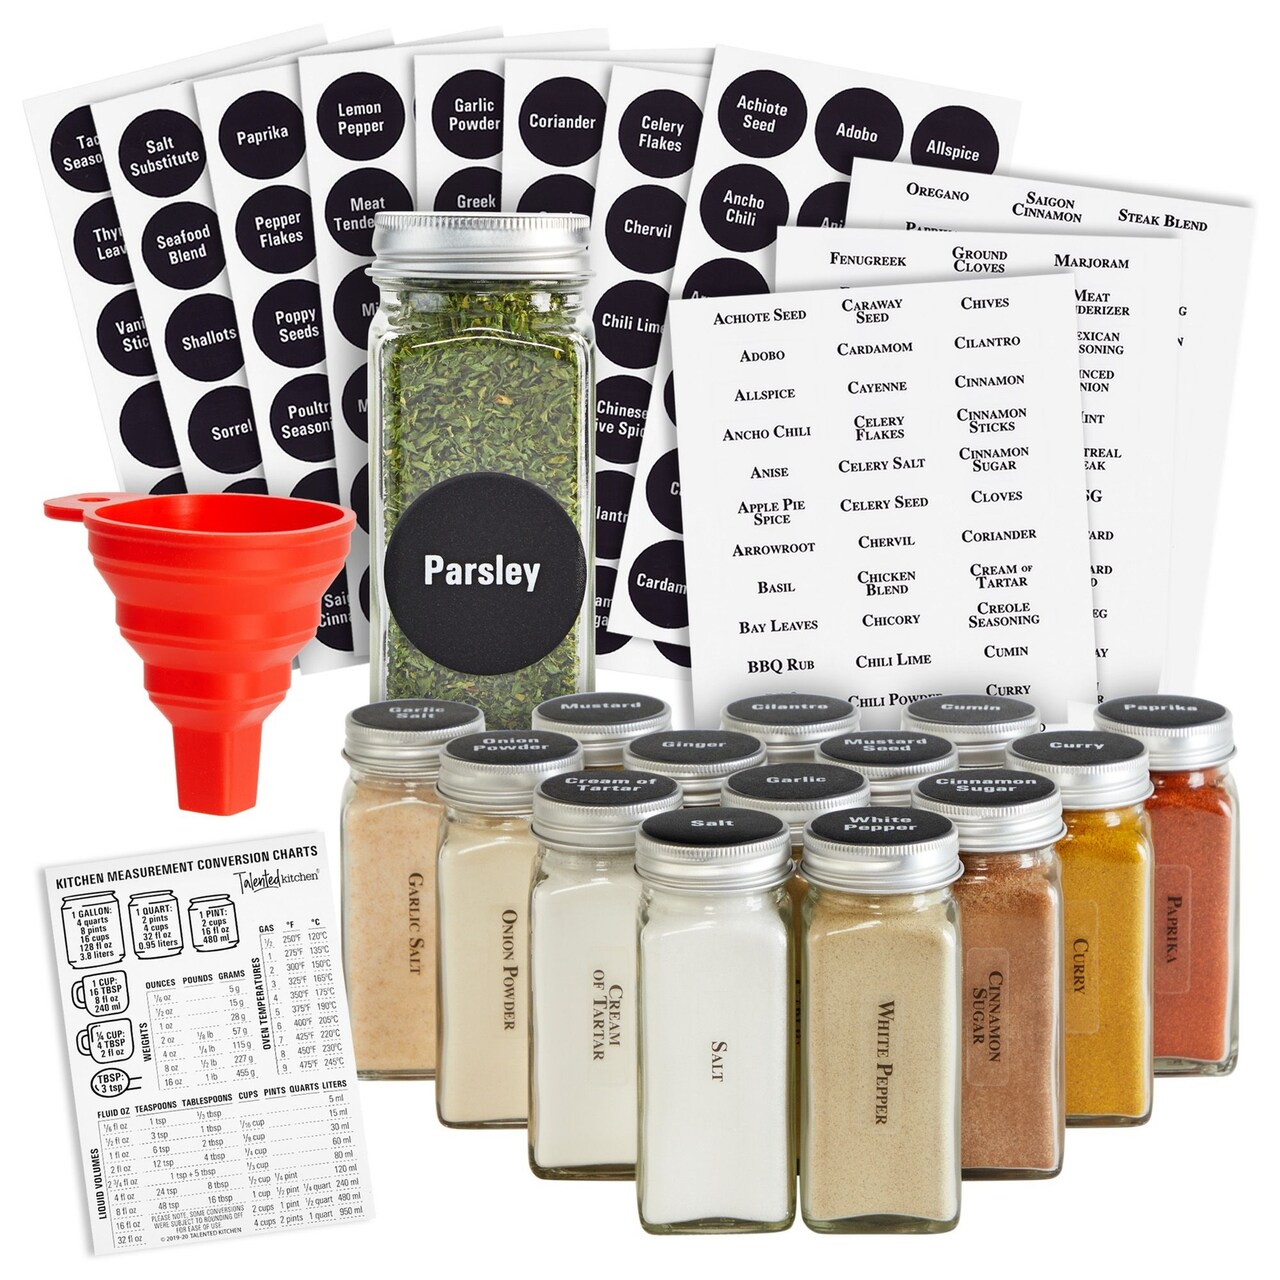 14 Pcs Talented Kitchen Spice Jars Set with 269 Spice Labels